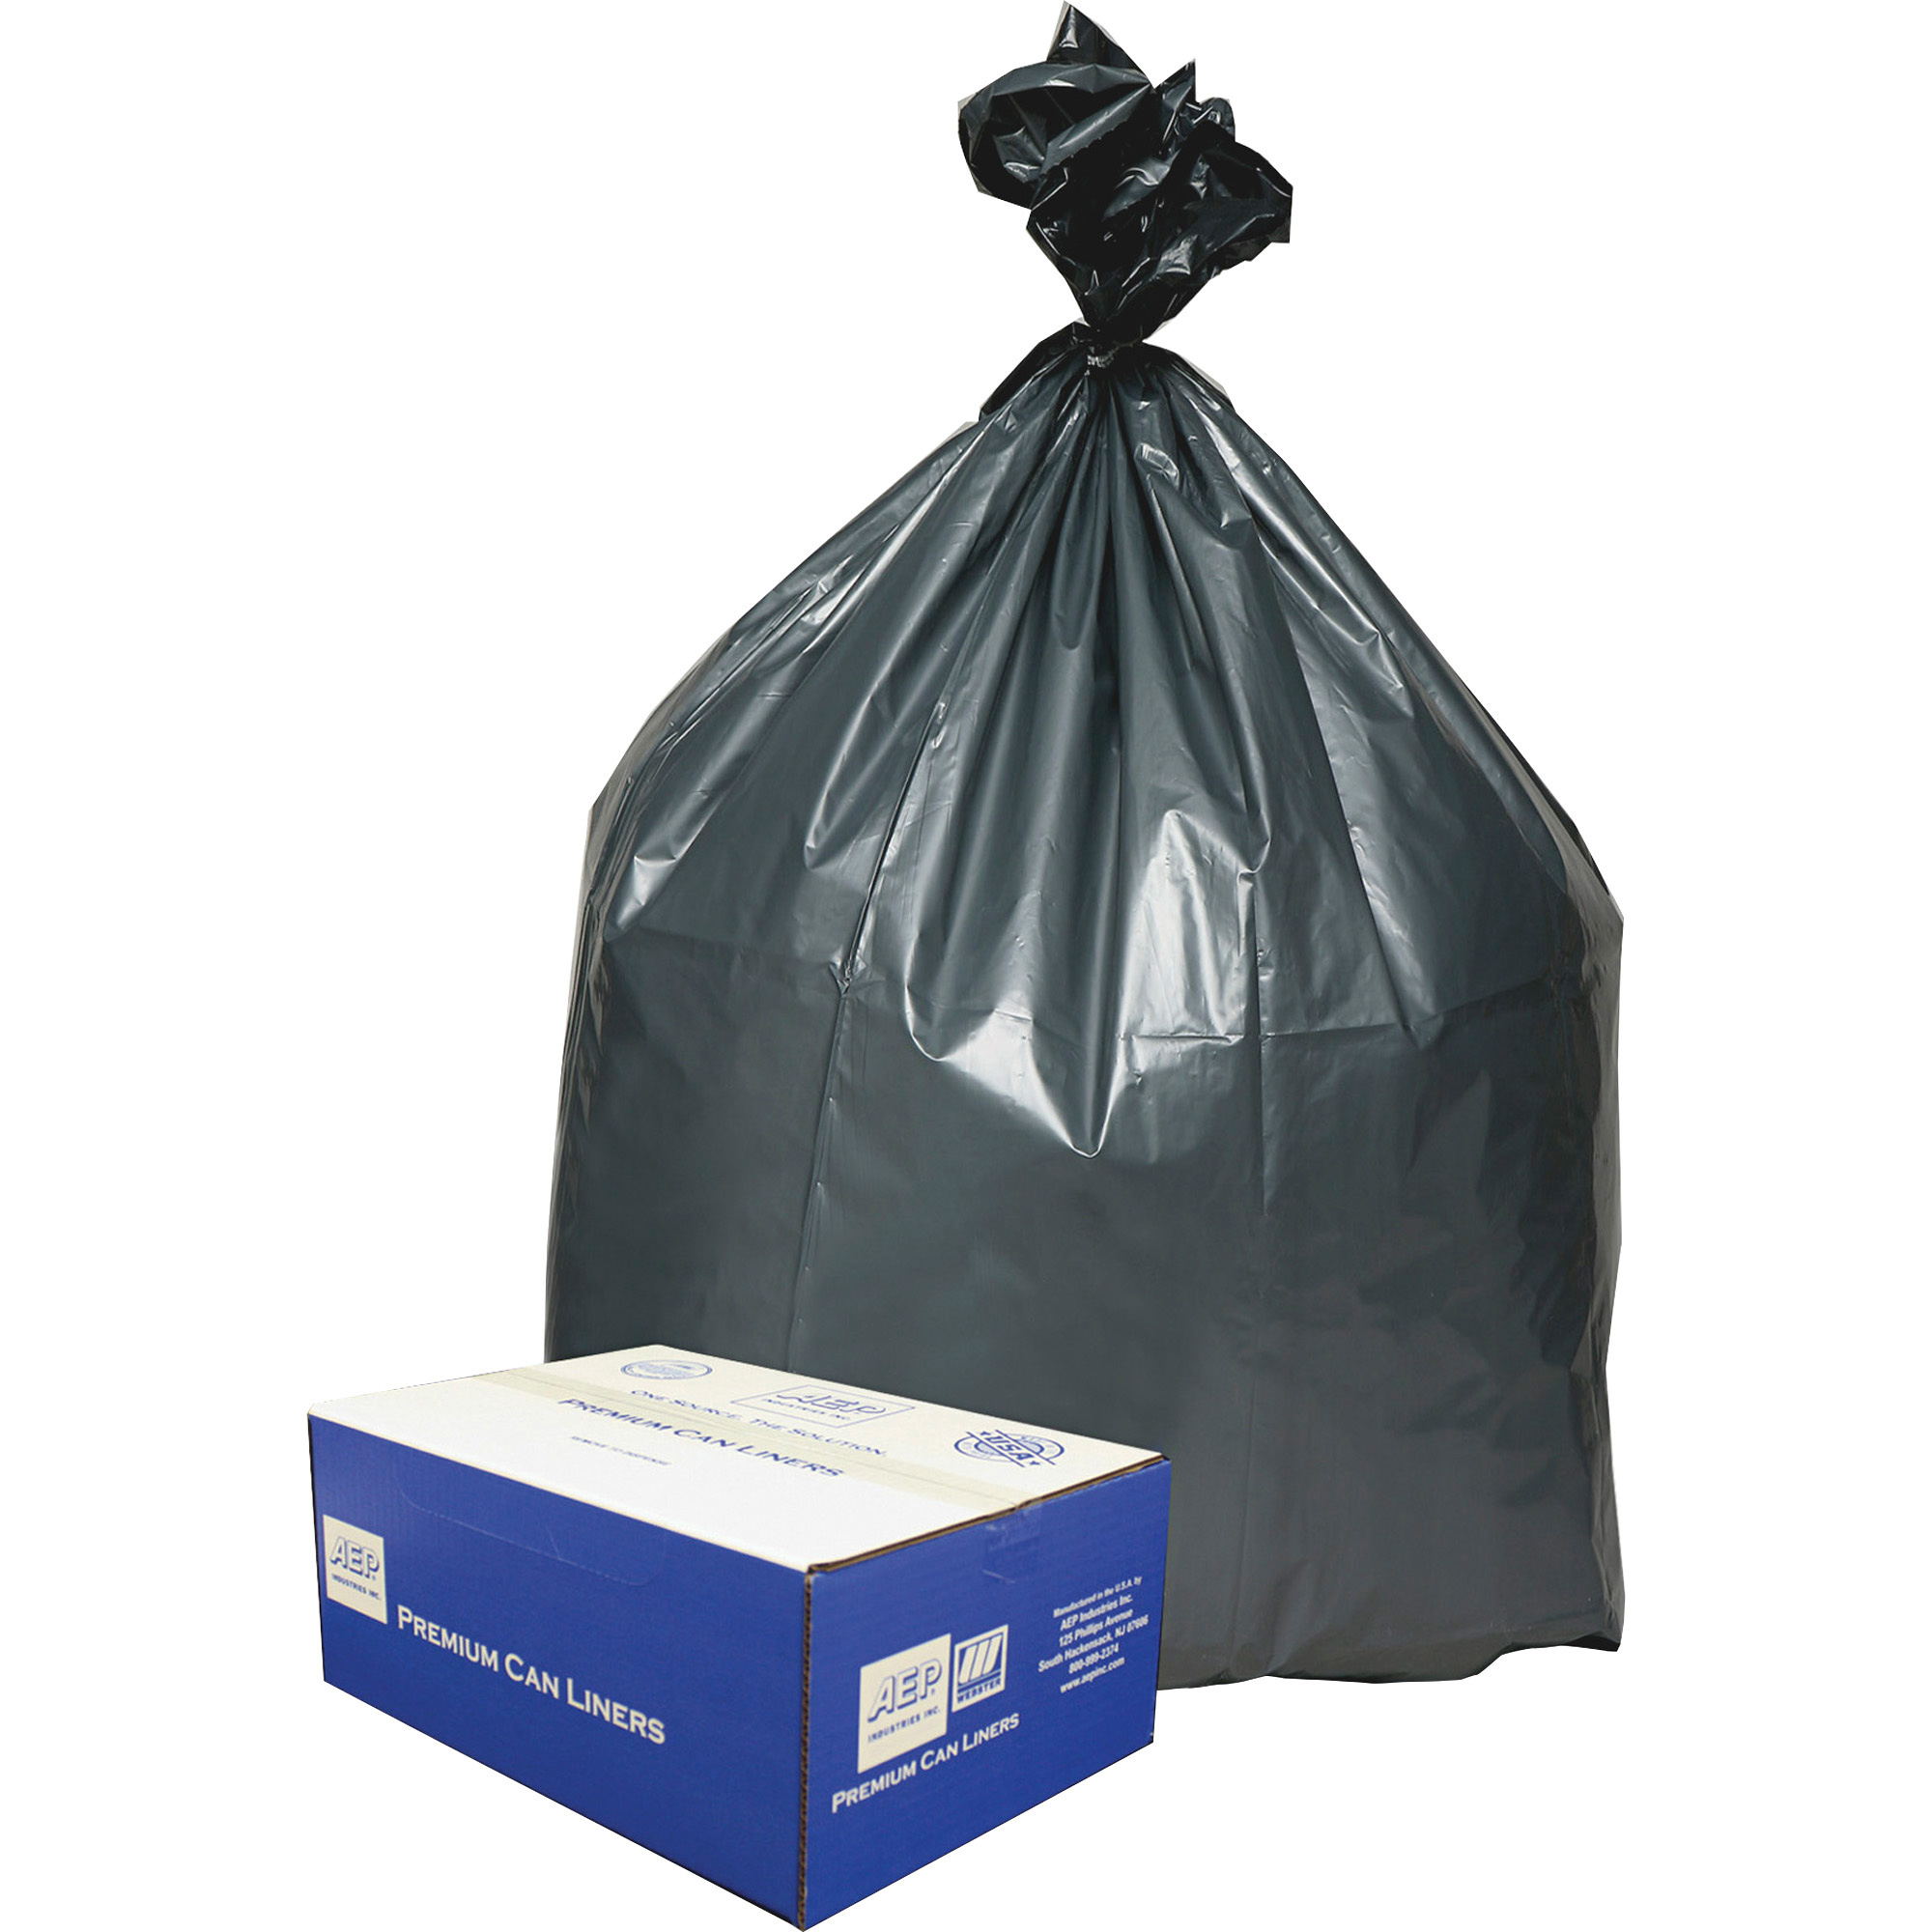 Nature Saver Black Low-density Recycled Can Liners - Extra Large Size - 60  gal Capacity - 38 Width x 58 Length - 1.25 mil (32 Micron) Thickness -  Low Density - Black - Plastic - 100/Carton - Cleaning Supplies - Recycled